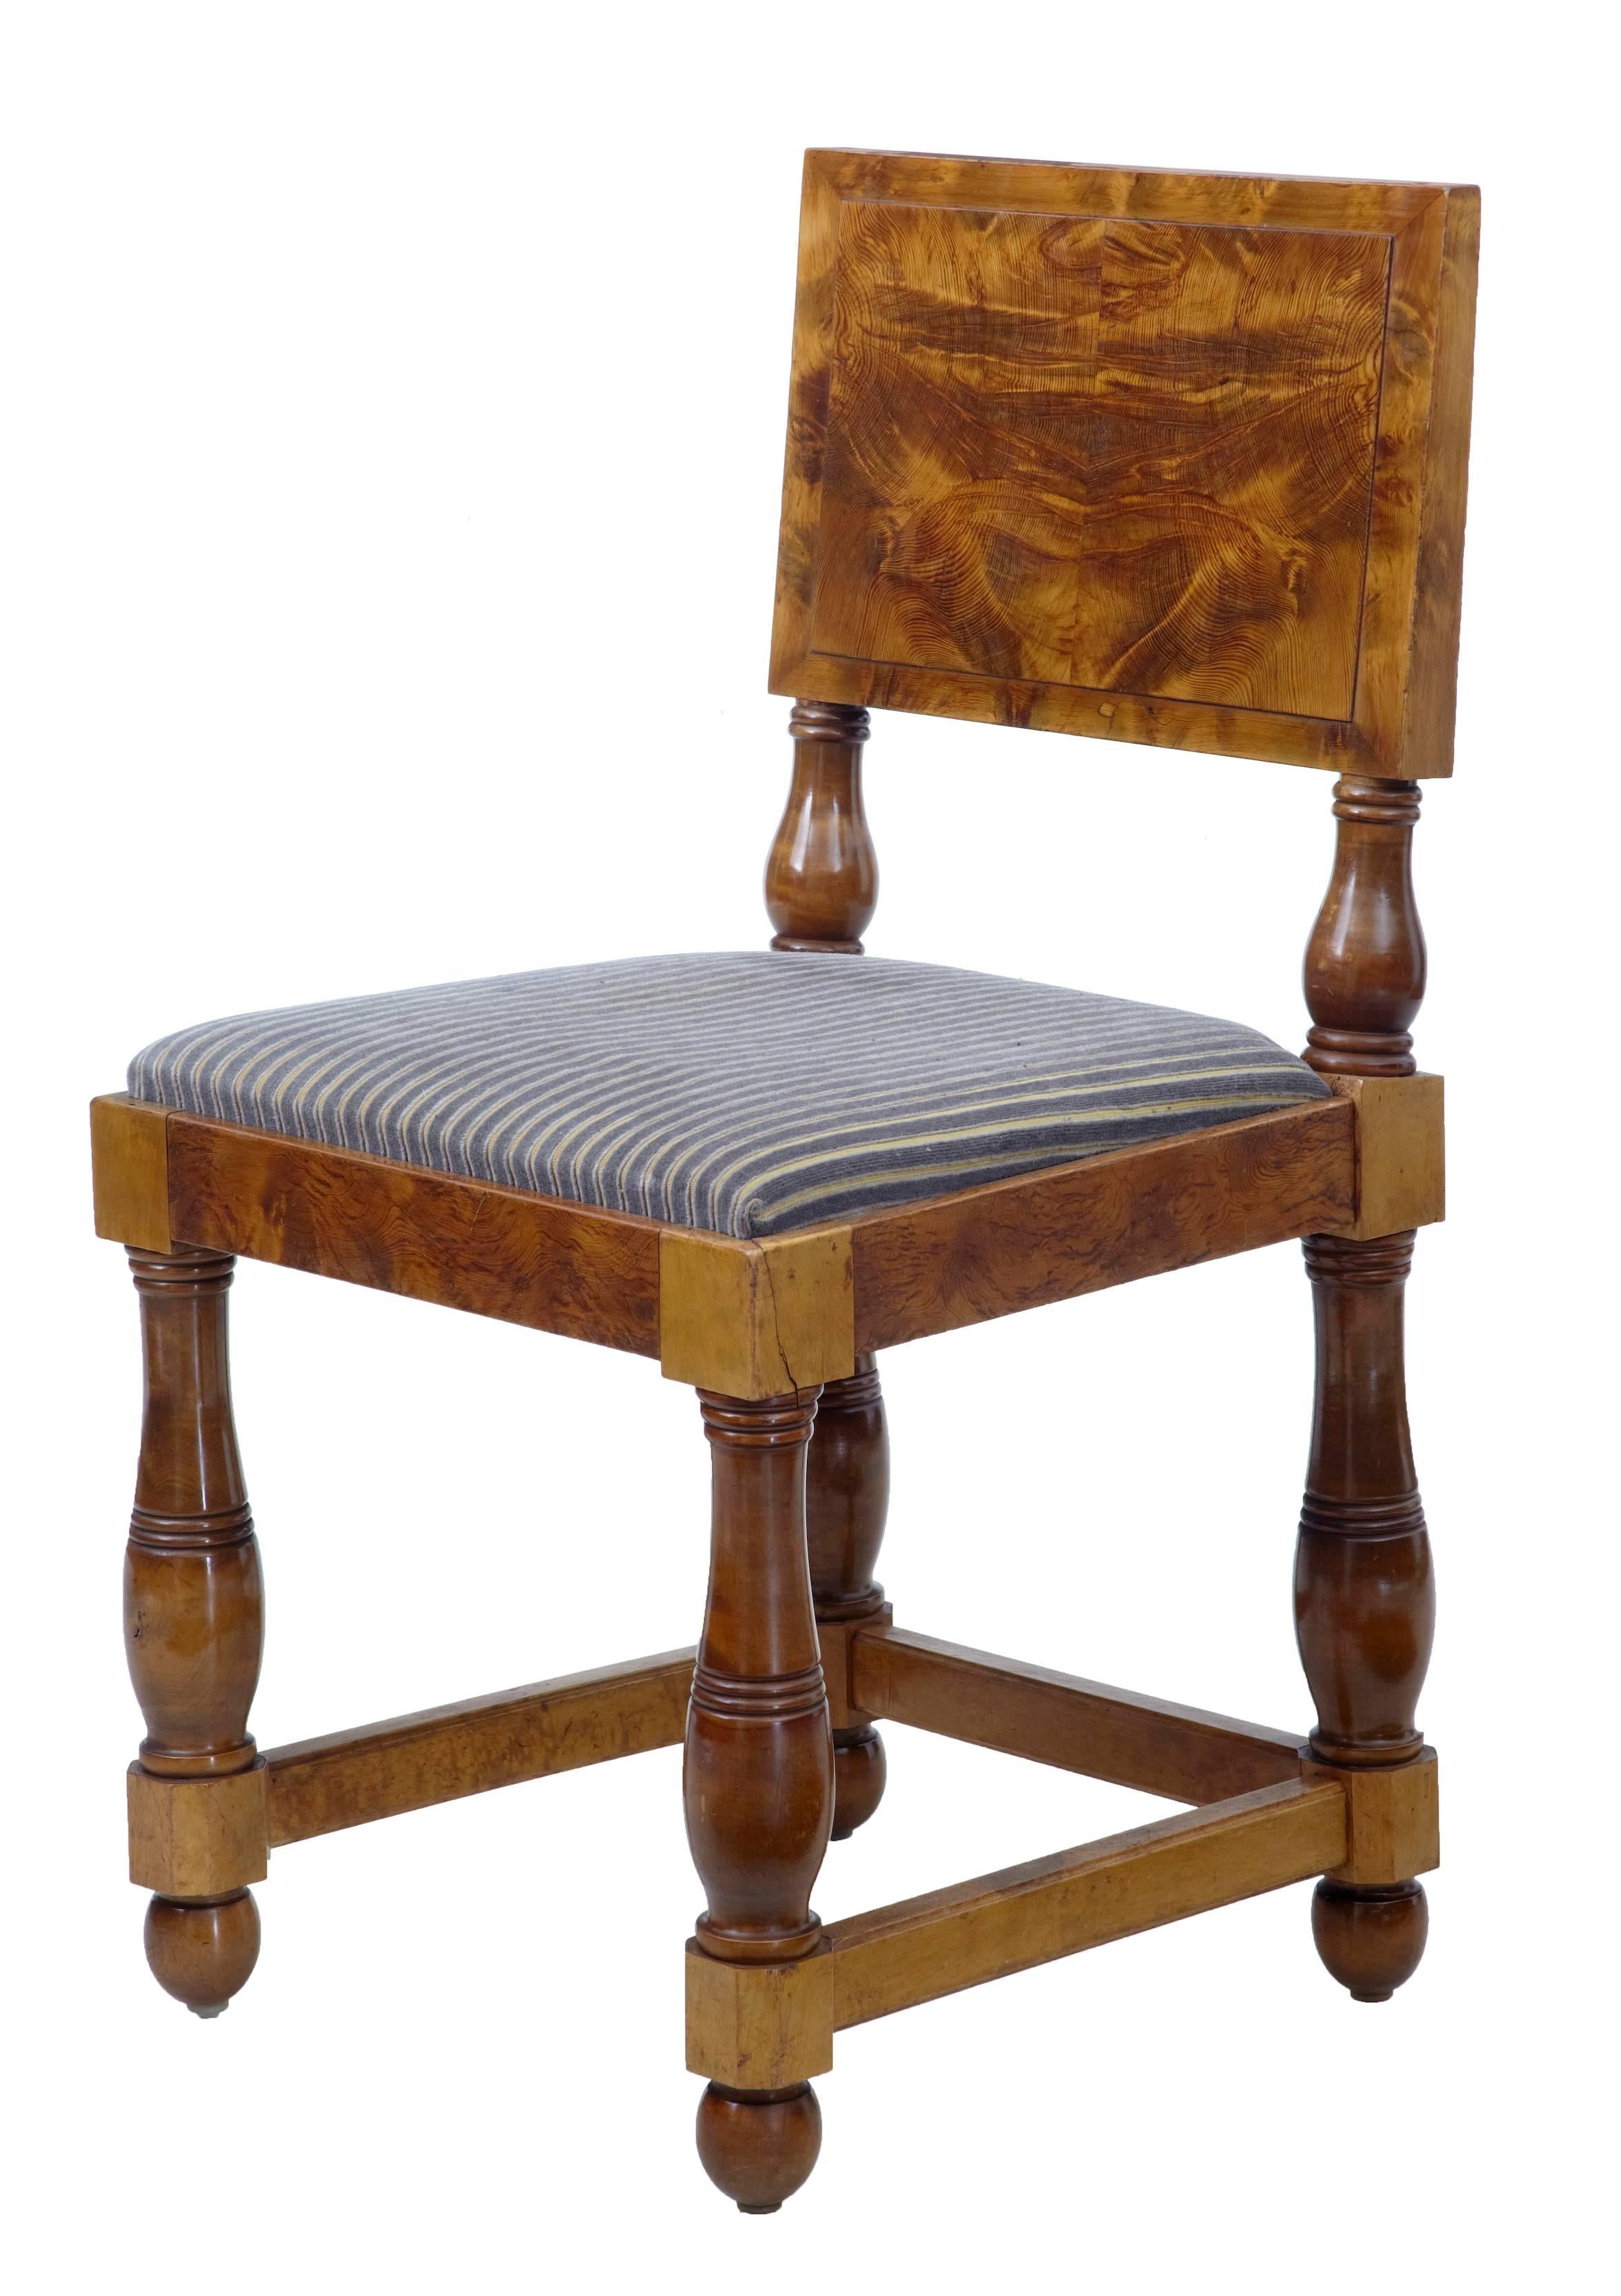 Unusual set of five pitch pine dining chairs, circa 1920.
Rich golden color with striking grain.
Standing on gun barrel turned legs.
Upholstery clean and ready for everyday use.

Measures: Height: 34 1/3".
Width: 18 3/4".
Depth: 18